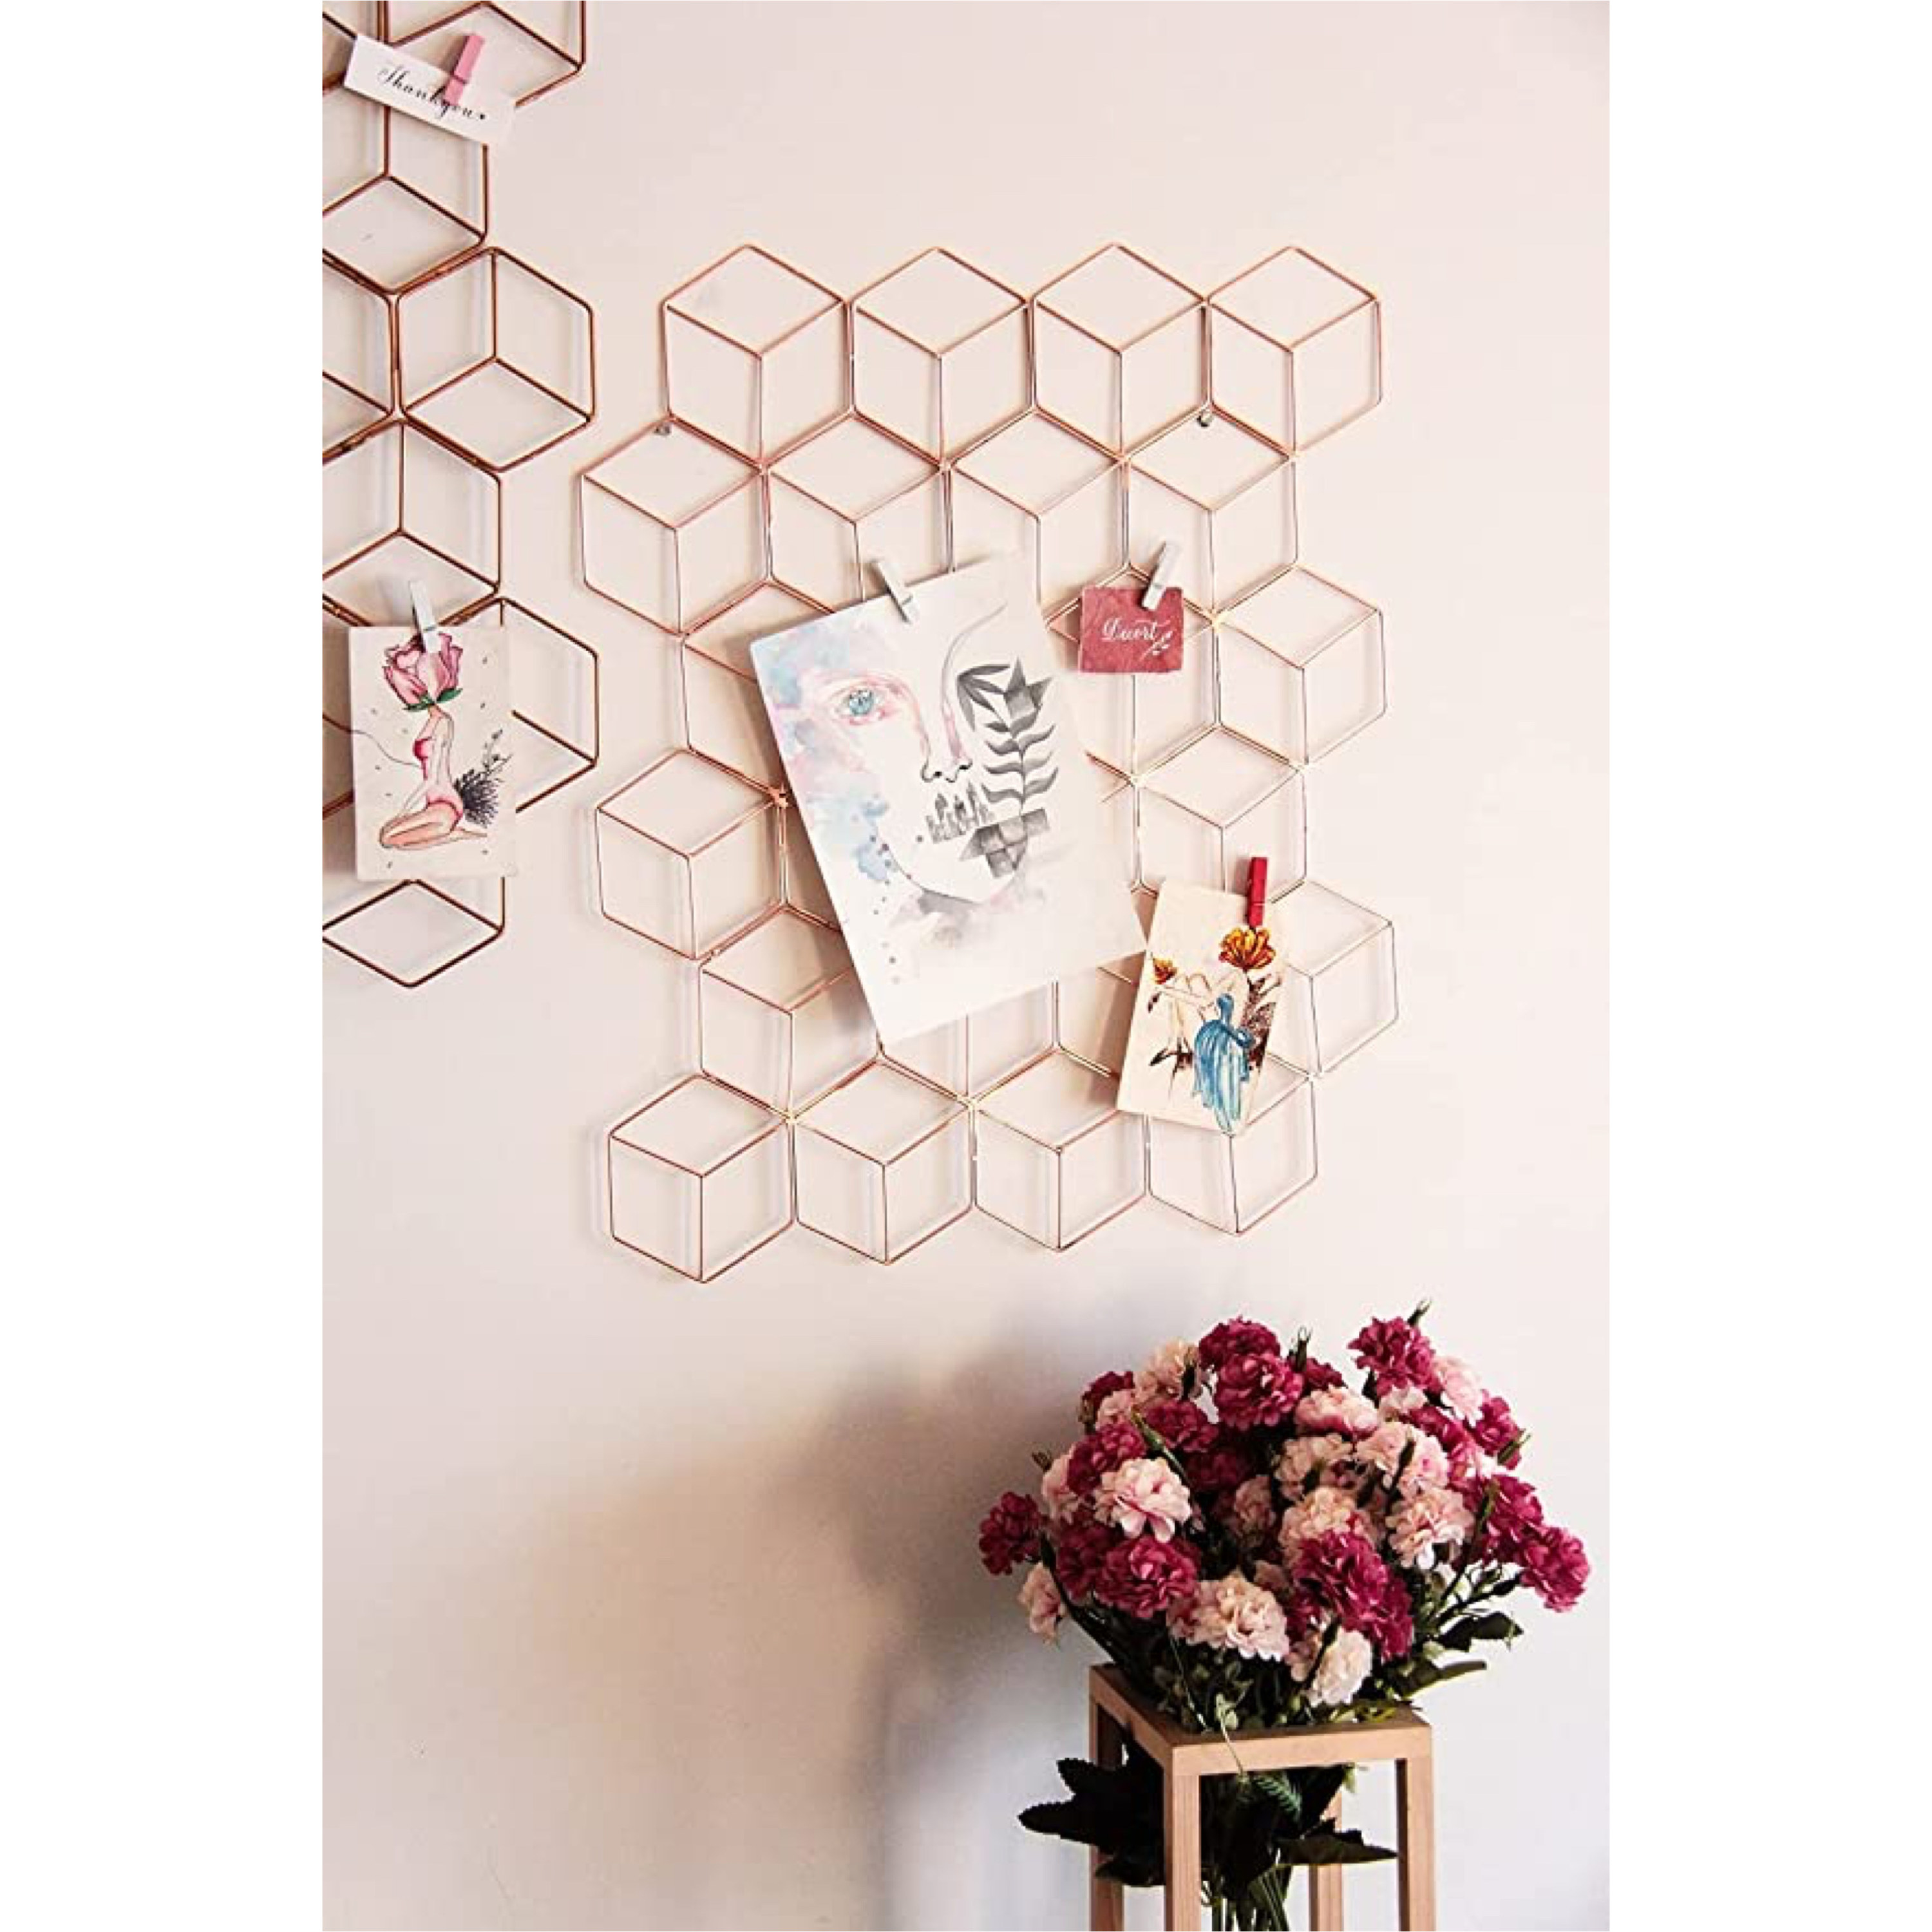 A hexagonal metal grid hanging on a wall above a bouquet of flowers